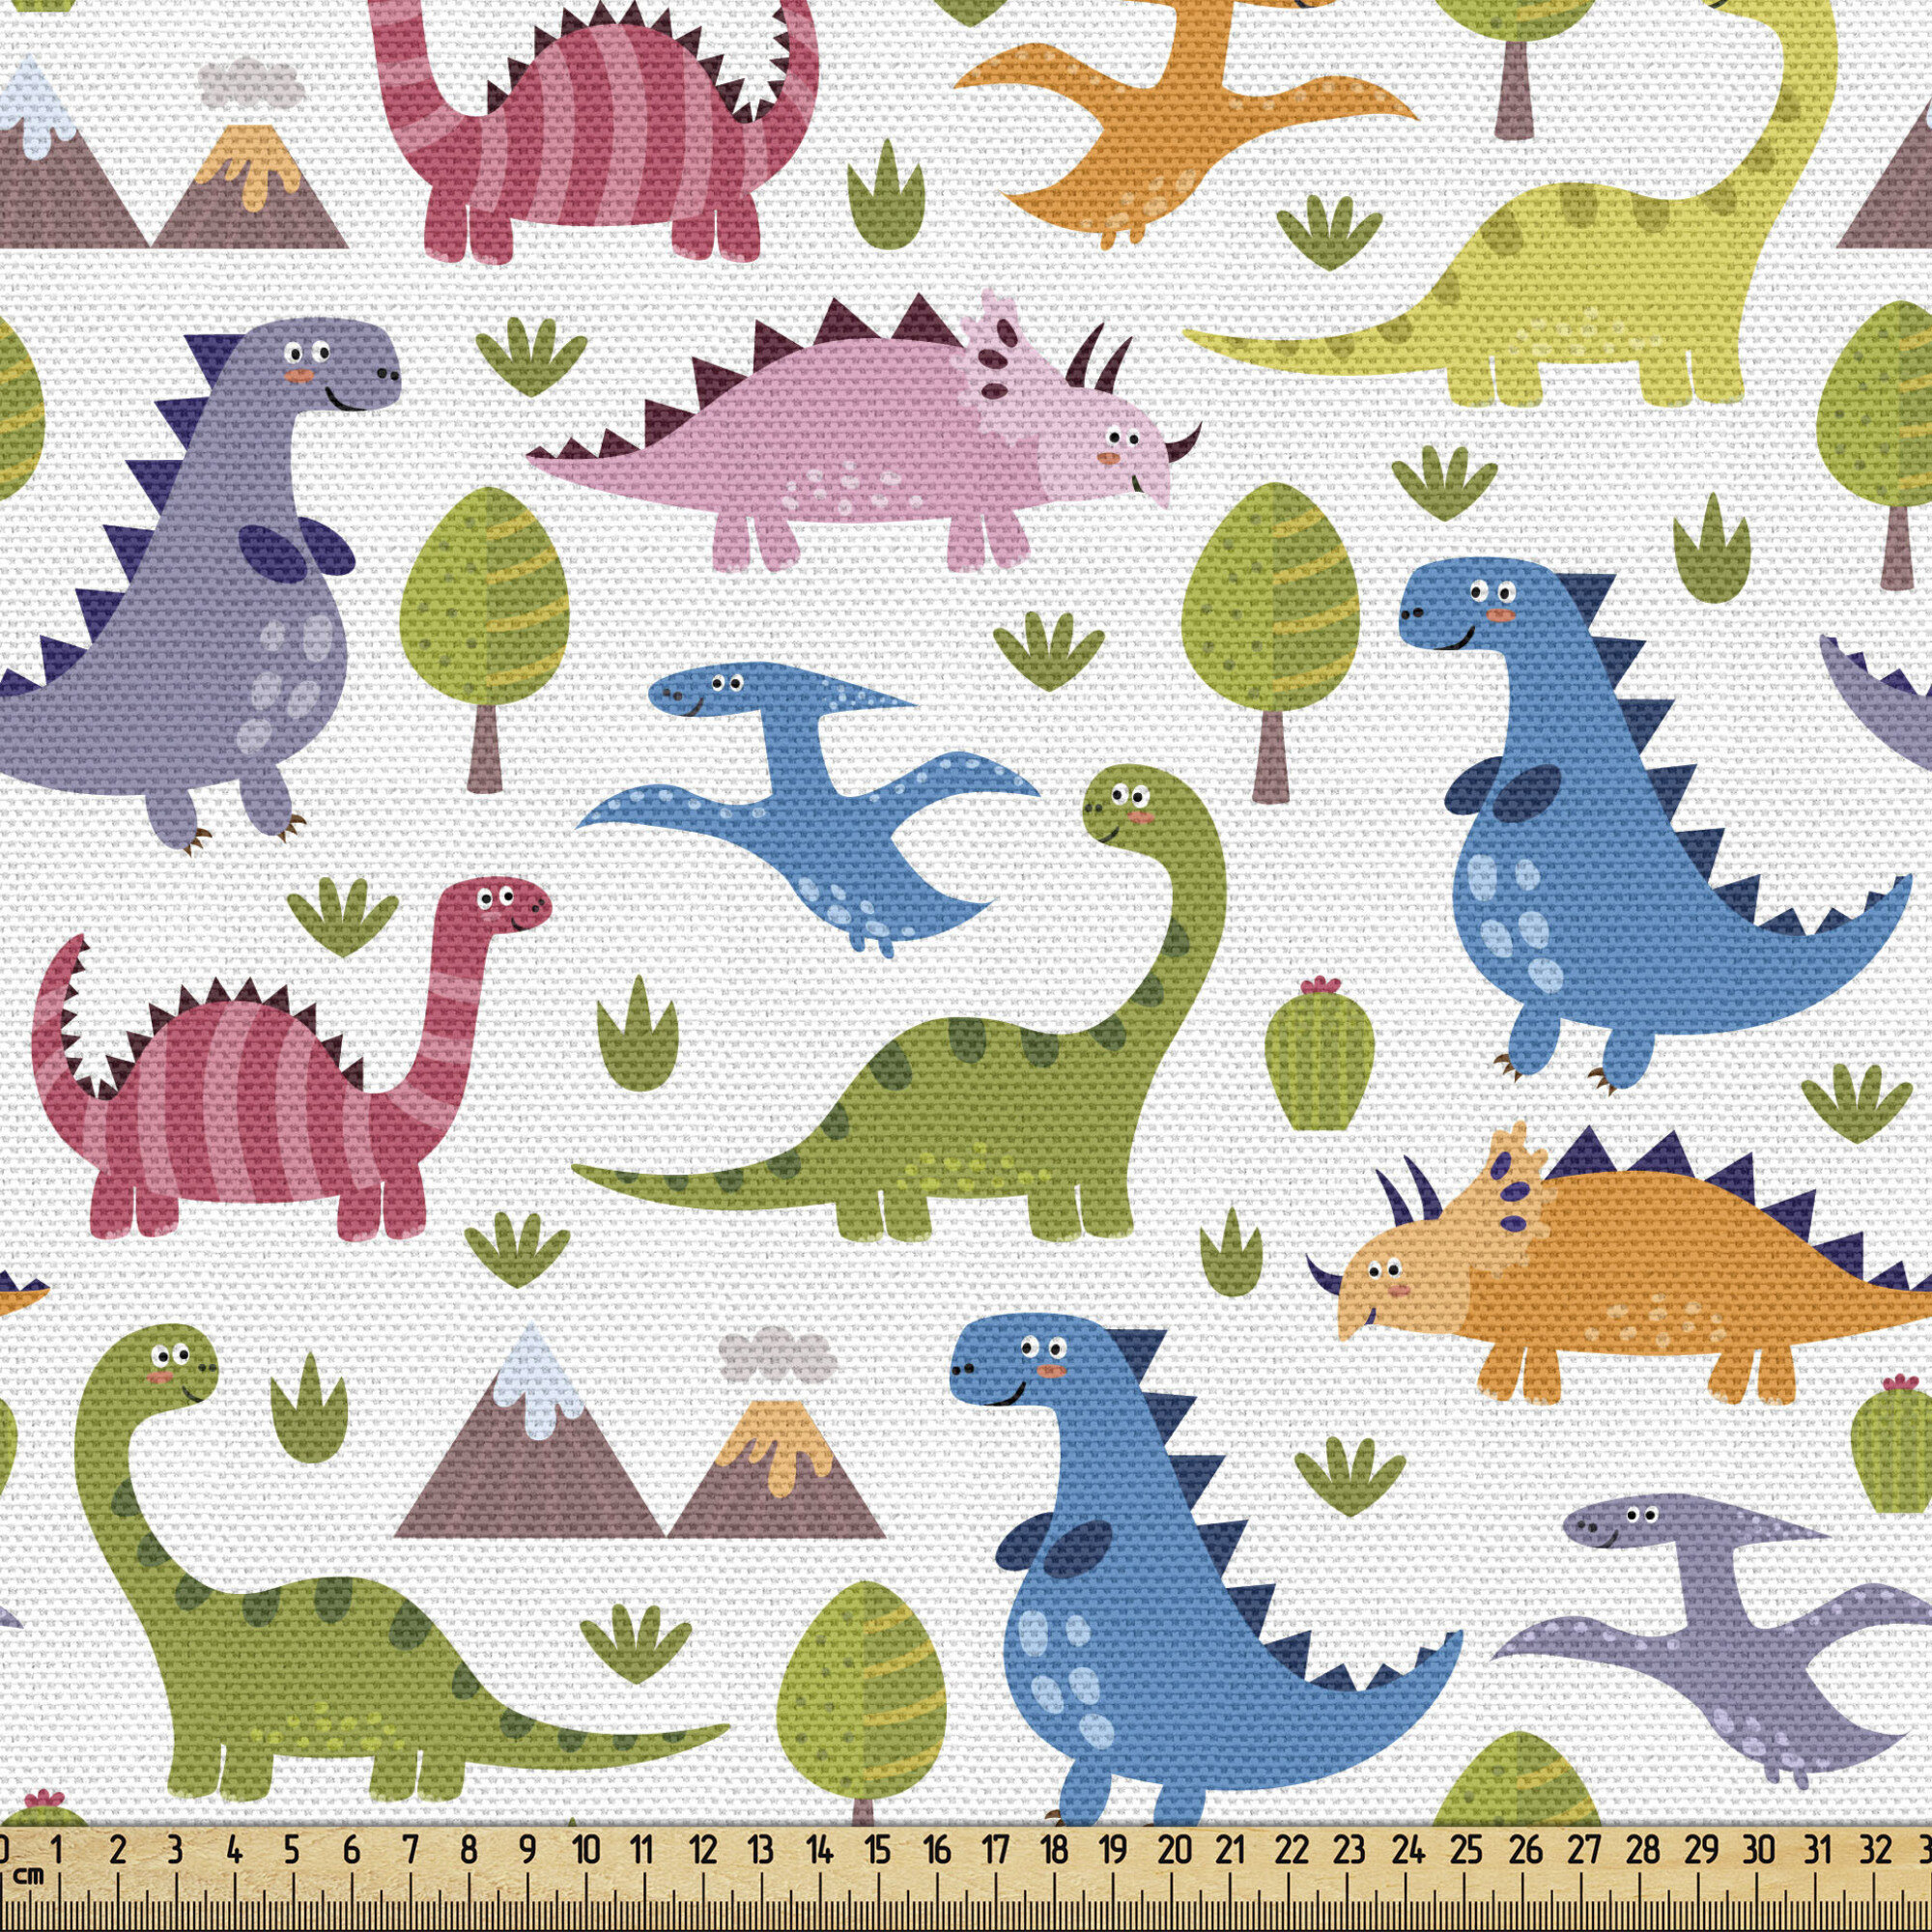 East Urban Home fab_47608_ Dino Fabric By The Yard, Cartoon Style Colorful  Dinosaurs T-Rex Triceratops Prehistoric Reptile Wildlife, Decorative Fabric  For Upholstery And Home Accents, Multicolor | Wayfair